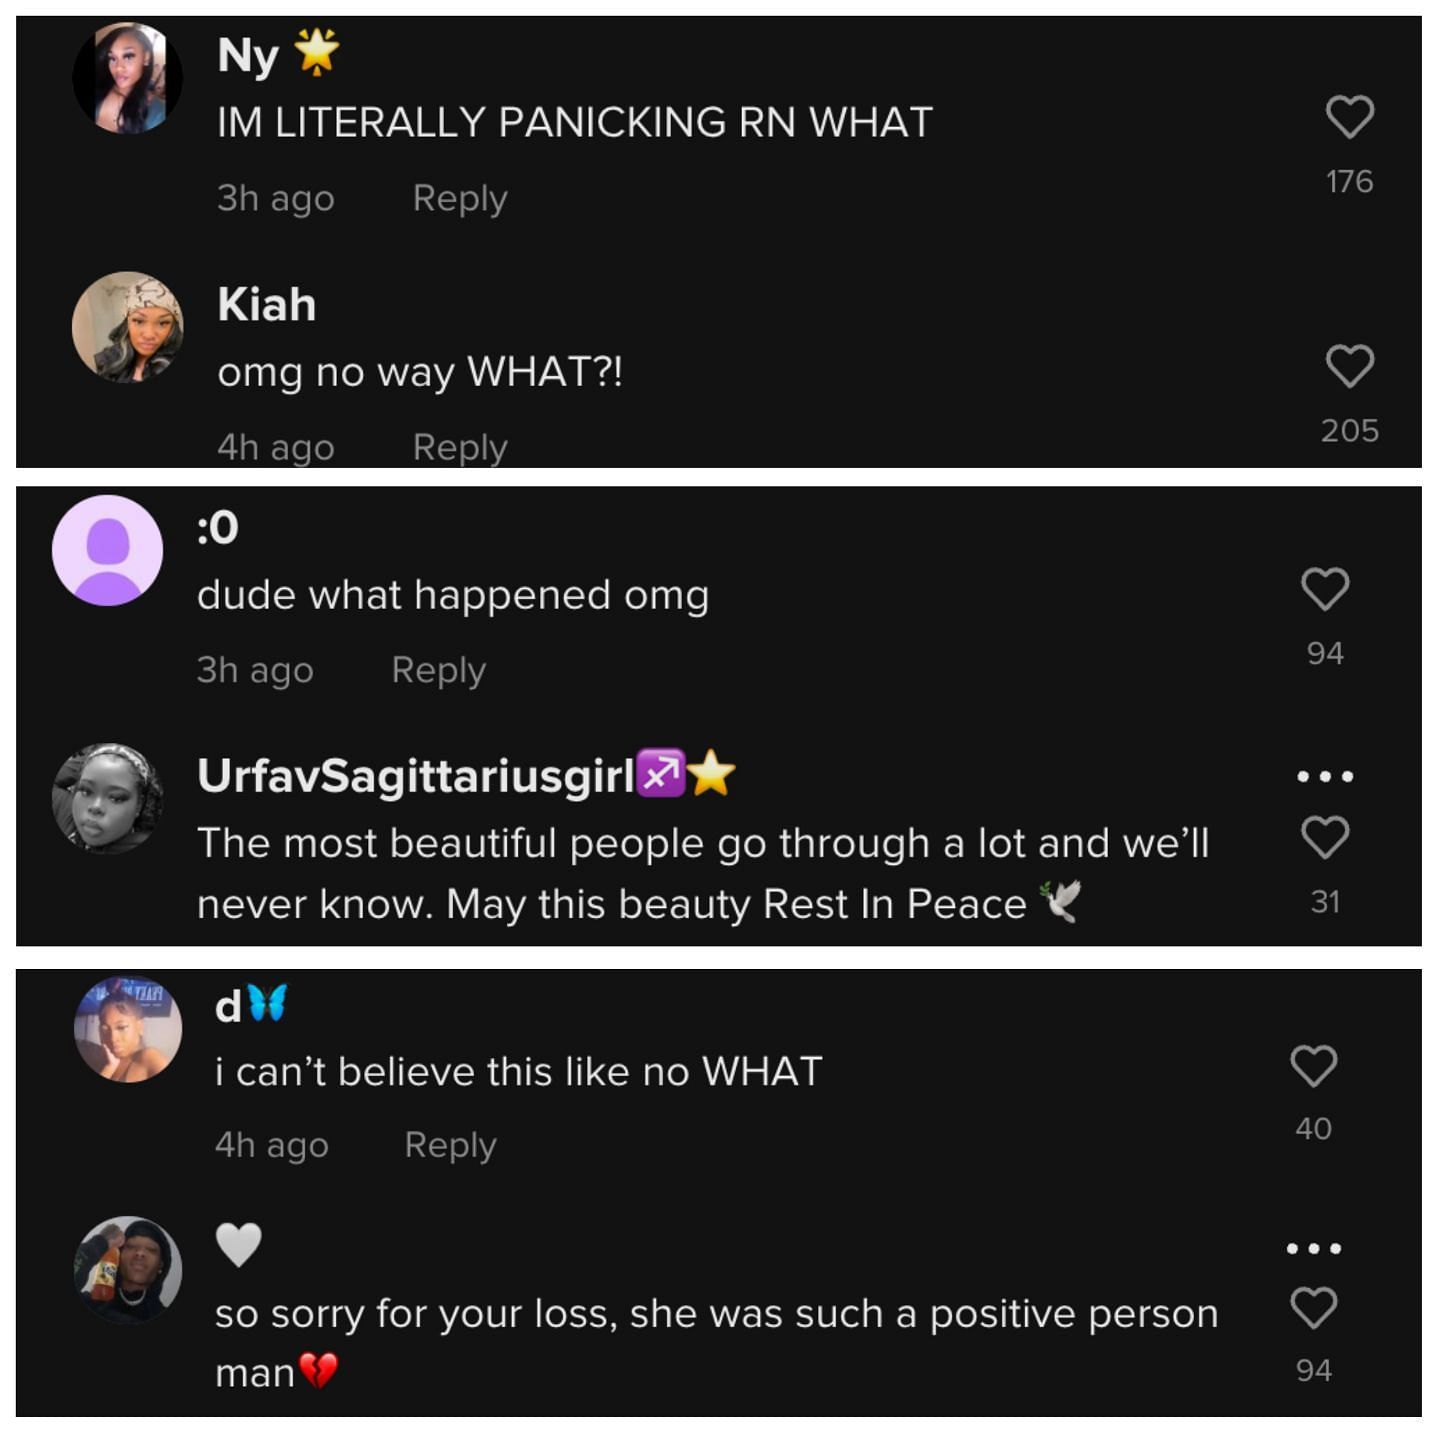 Social media users shared their sadness after they heard about the demise of the influencer. (Image via TikTok)